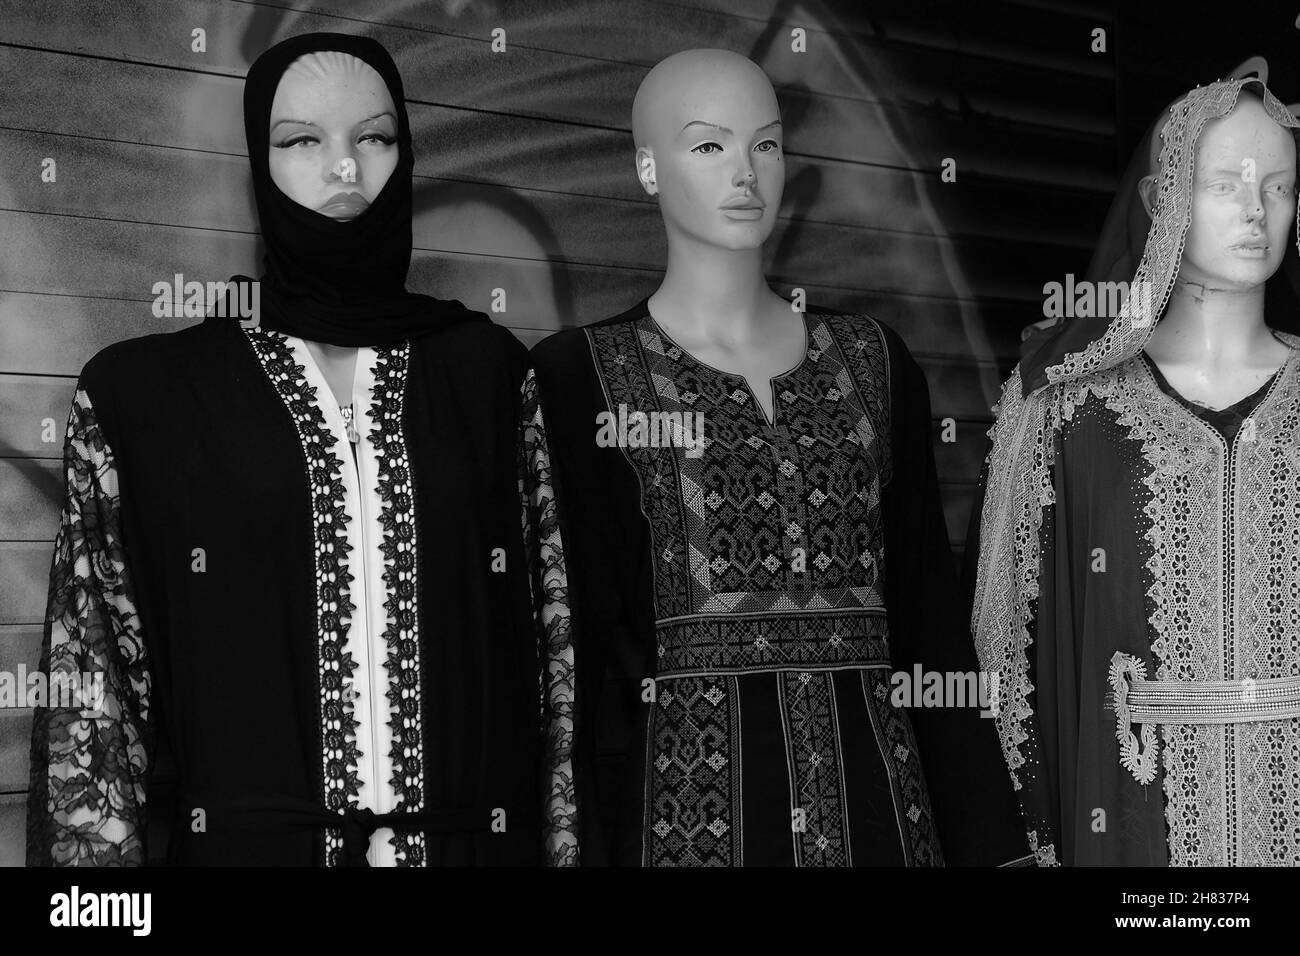 Scenic view of mannequins wearing traditional costumes Stock Photo